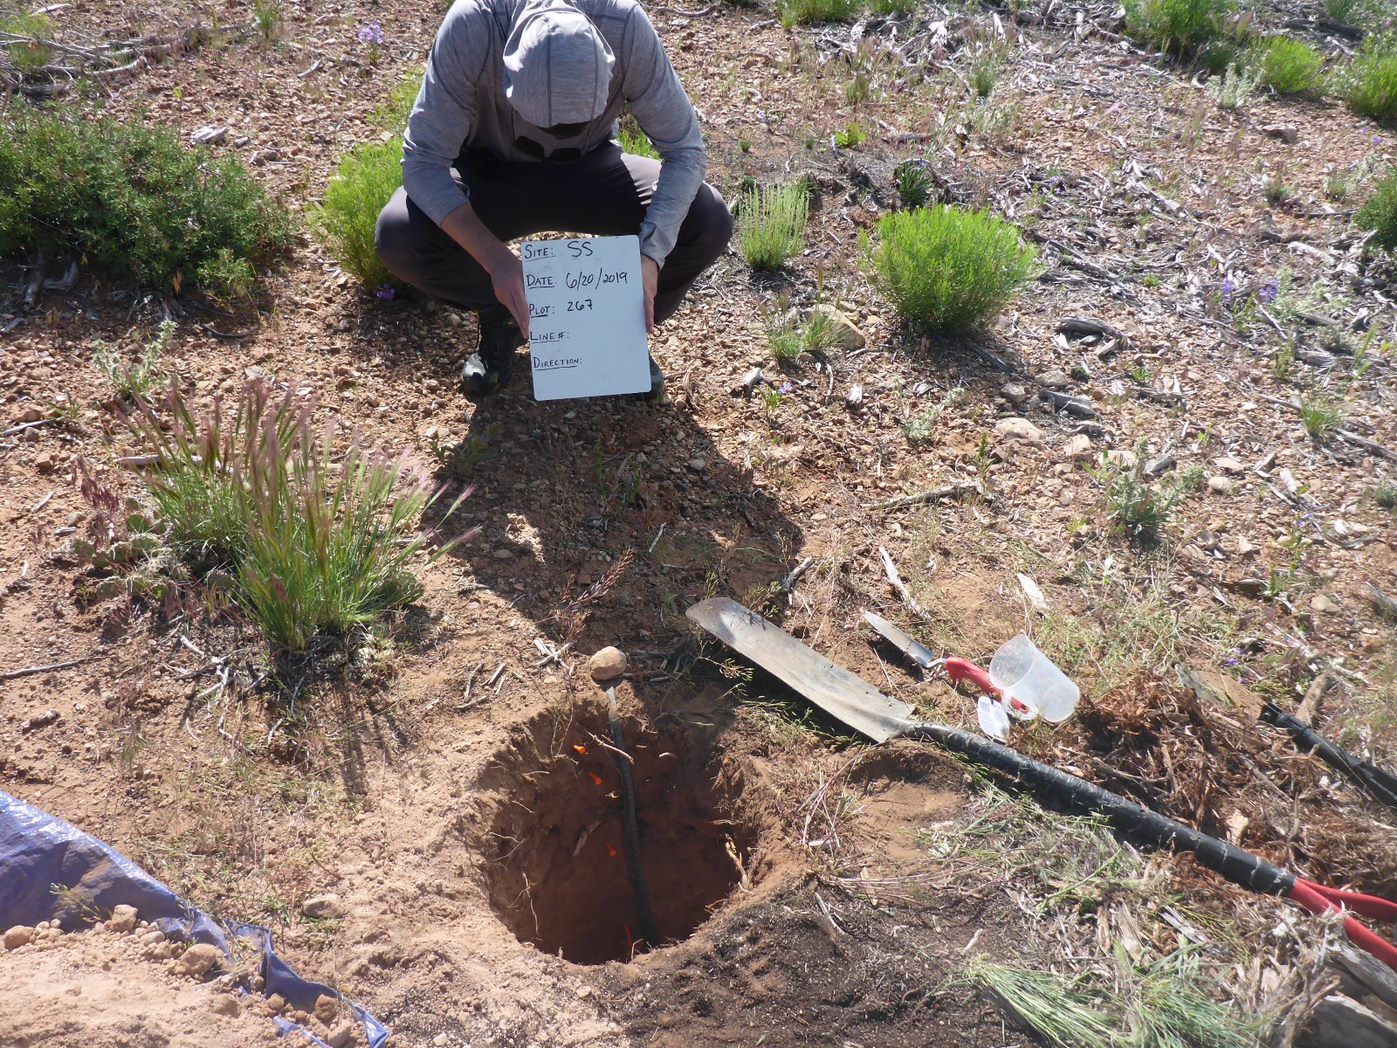 A person crouches next to a deep, round hole with the soil sample on a blue tarp to the left of the hole and a shovel and other tools to the right. The person holds an identifying sign.